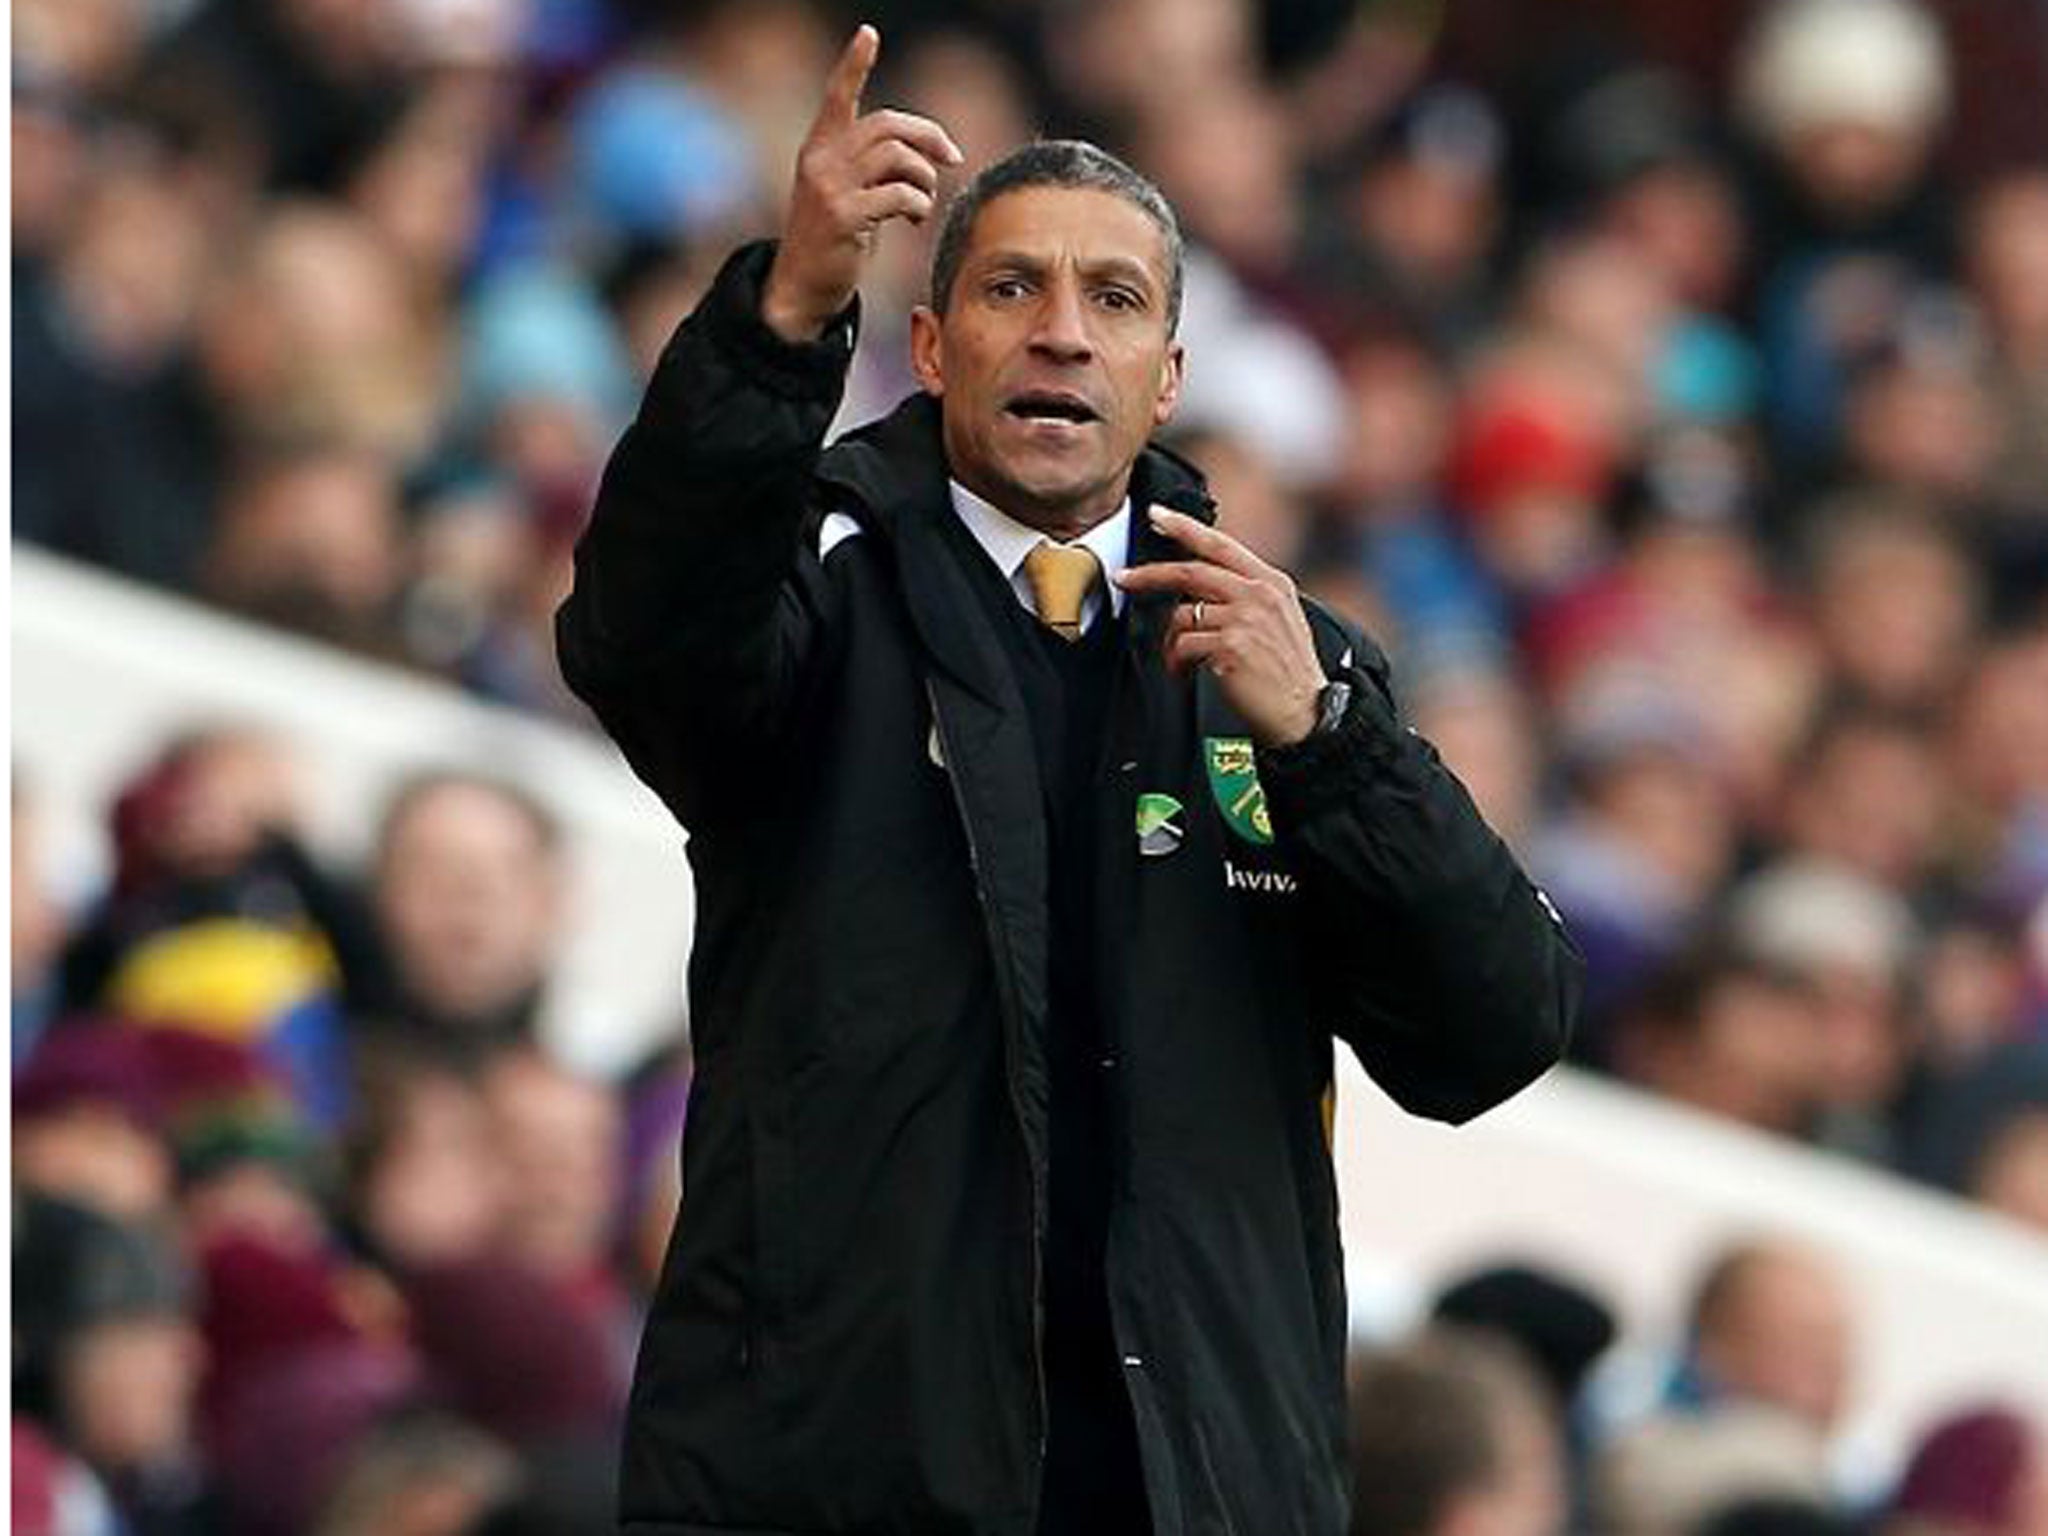 Chris Hughton wants a reaction from his players after the 5-0 loss to Liverpool